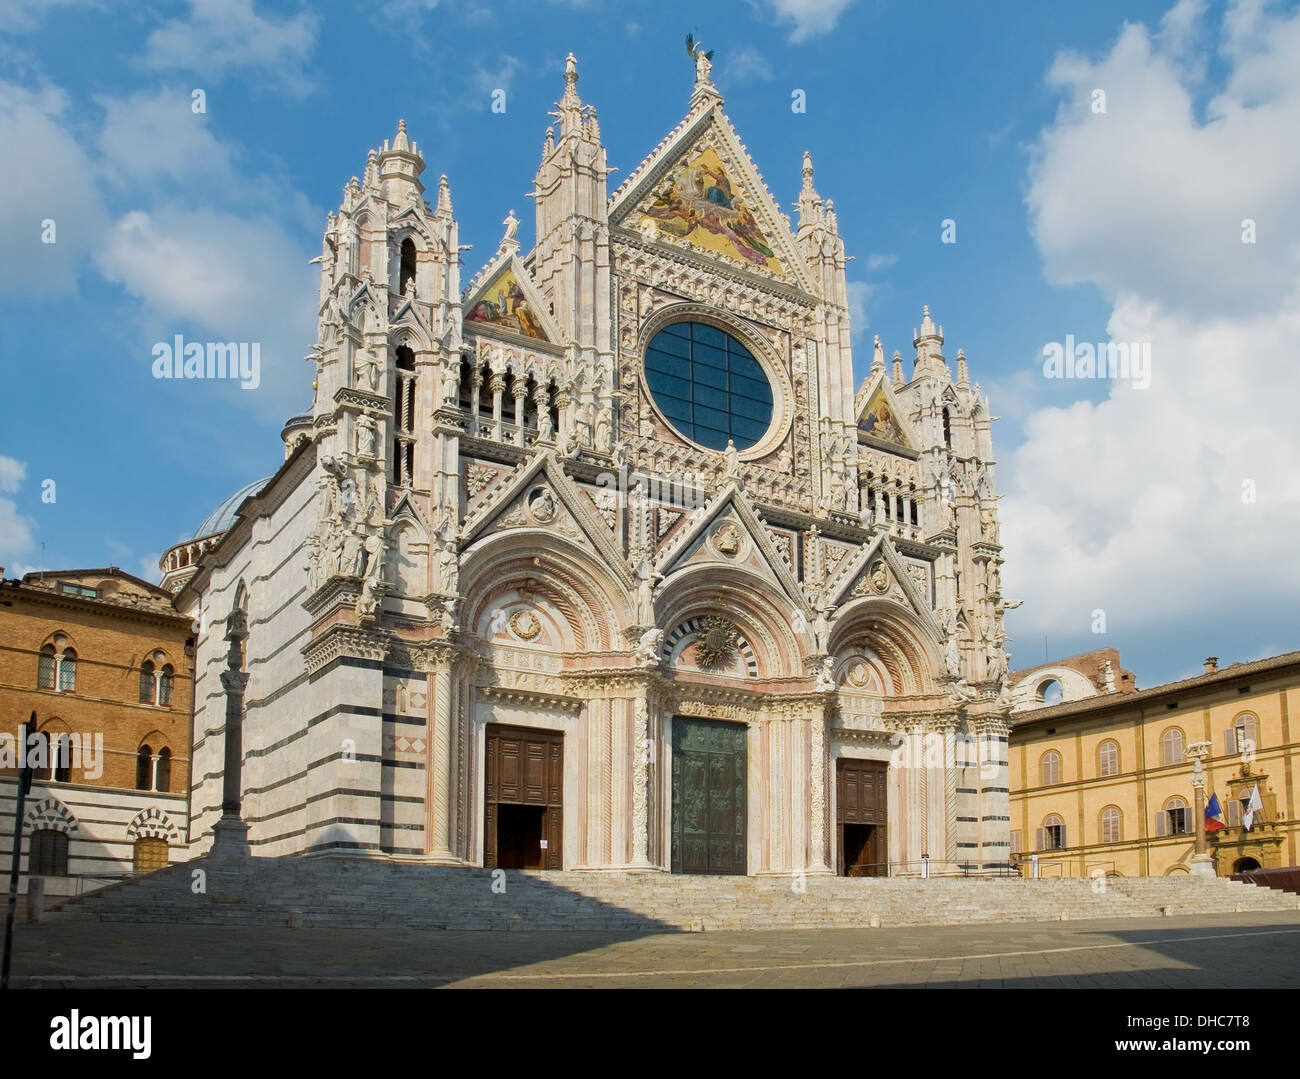 The west facade of the Siena Cathedral in Opera della metropolitana. Siena, Italy Stock Photo